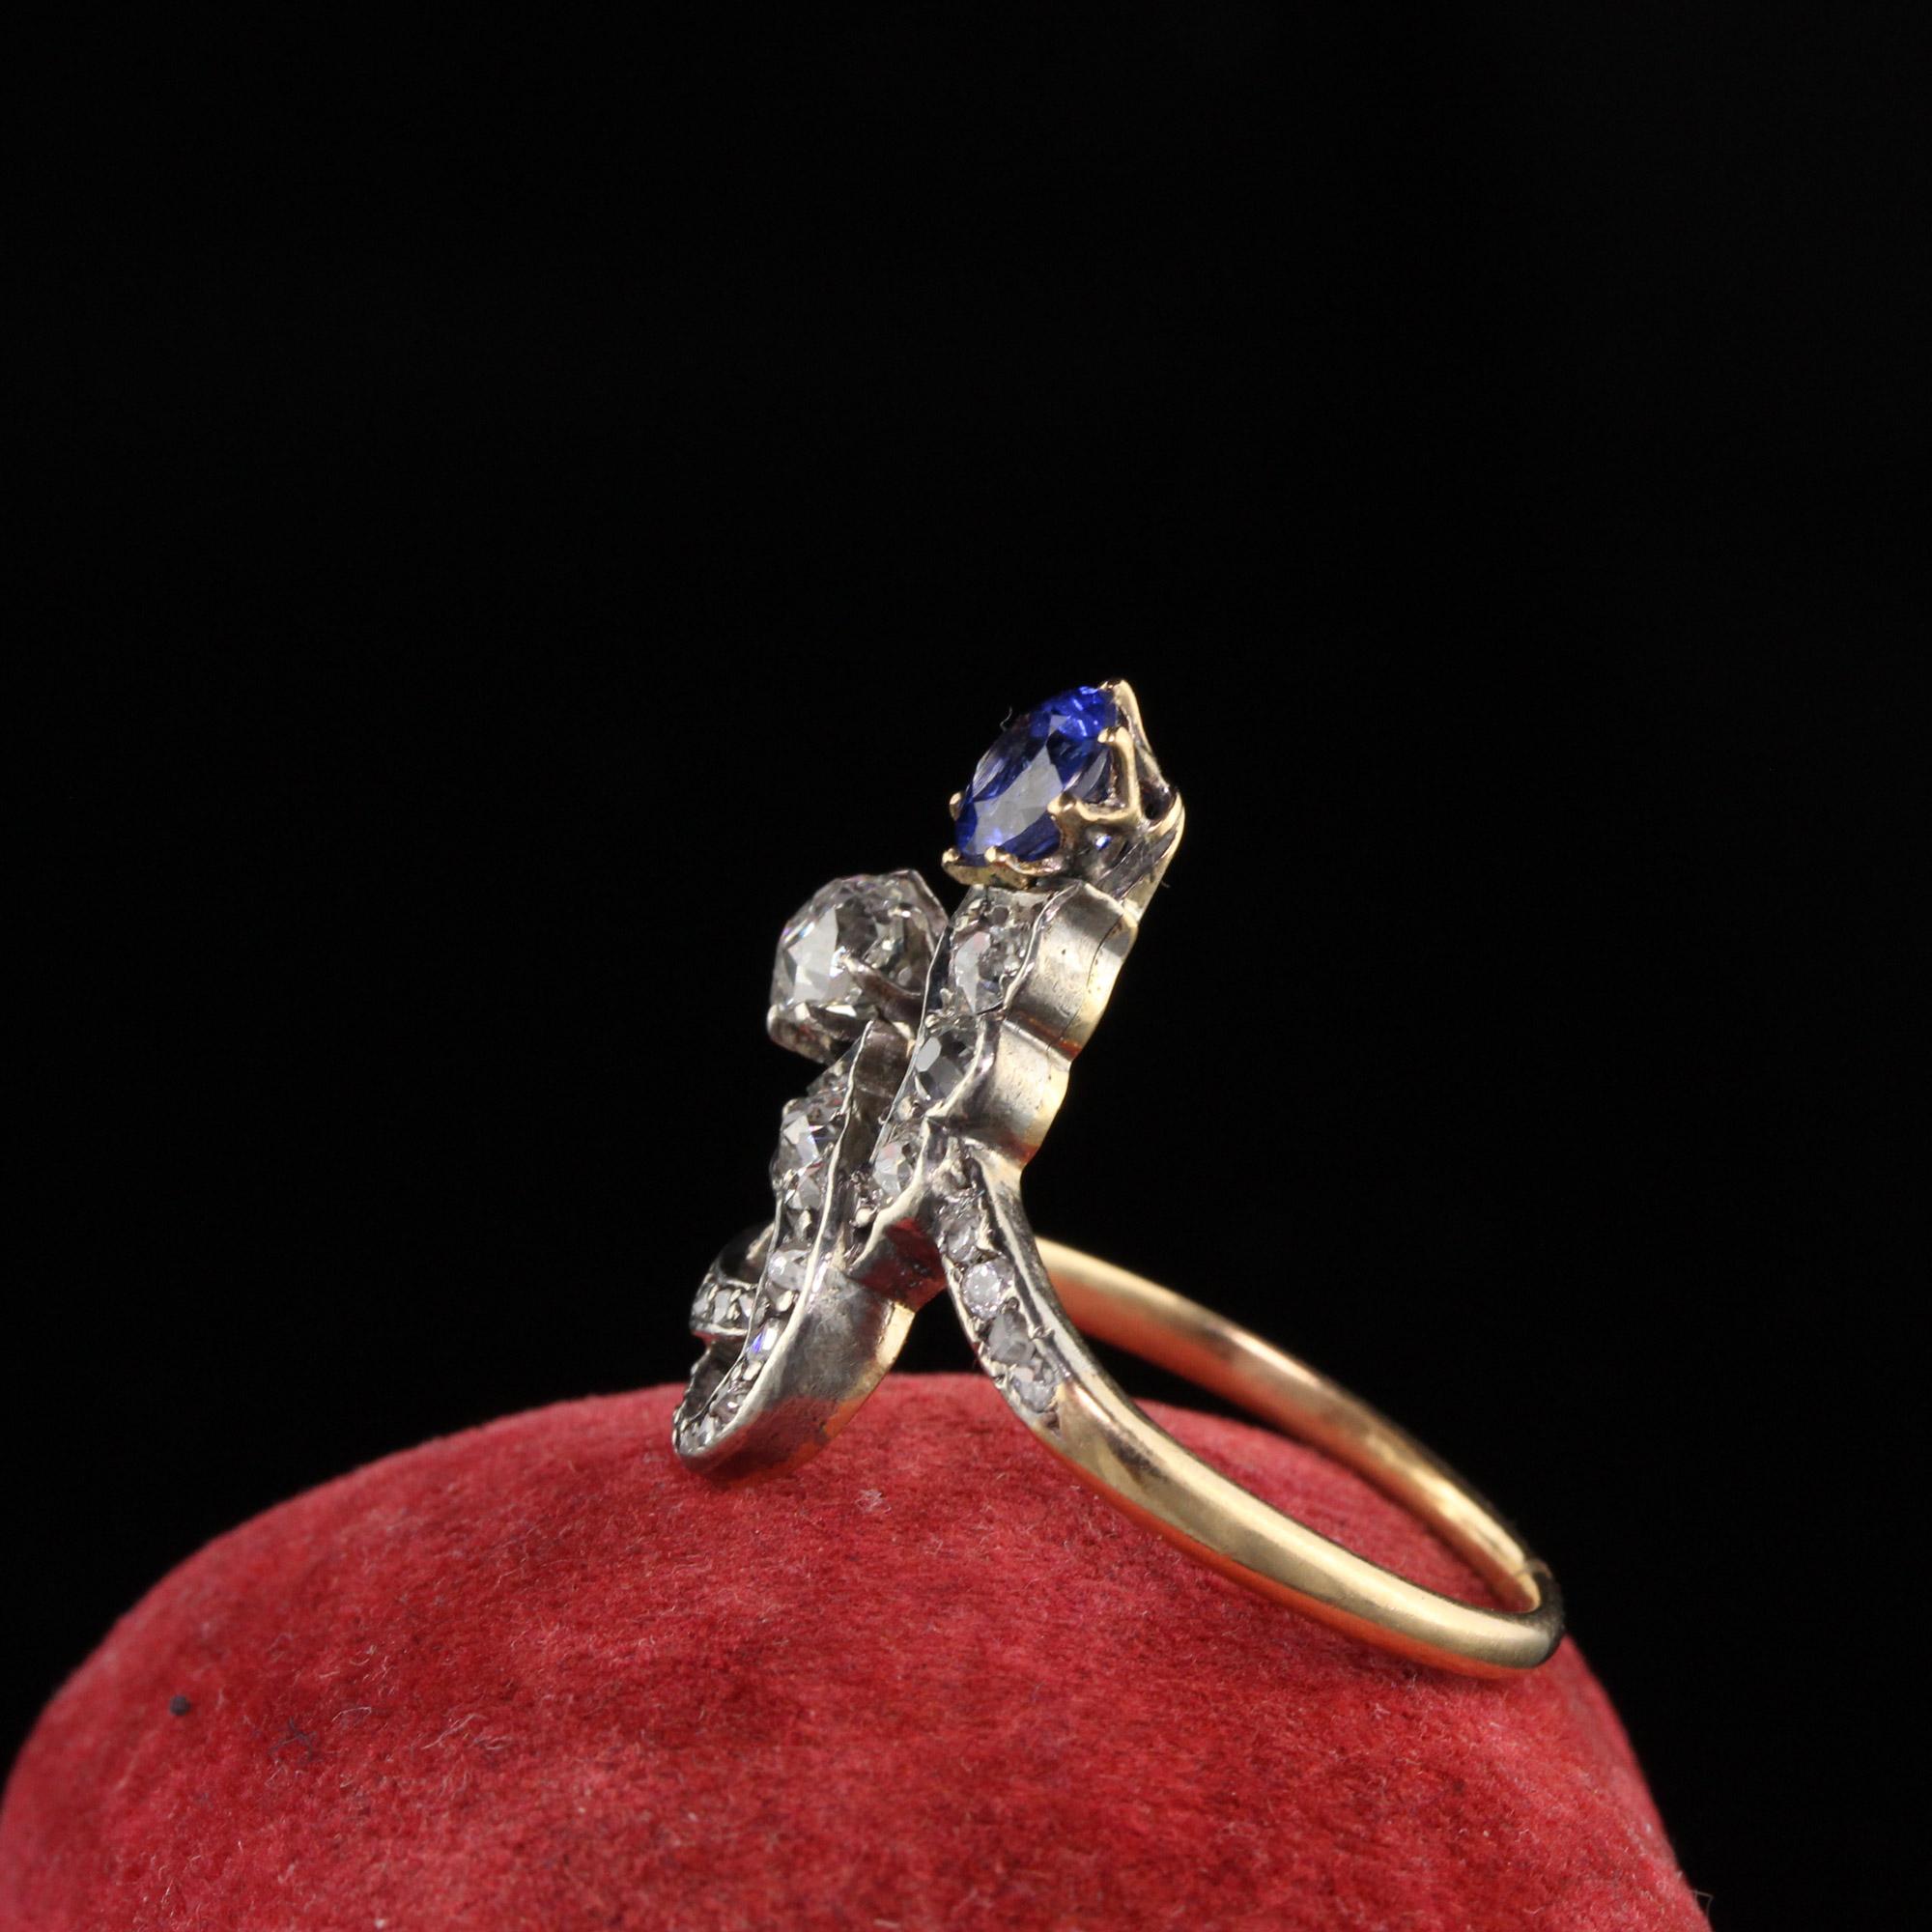 Stunning antique victorian ring with a gorgeous sapphire and old mine cut diamonds.

Item #R0506

Metal: 18K Yellow Gold

Weight: 4.0 Grams

Total Diamond Weight: Approximately 0.90 cts

Diamond Color: H

Diamond Clarity:  VS2

Ring Size: 4.75

This